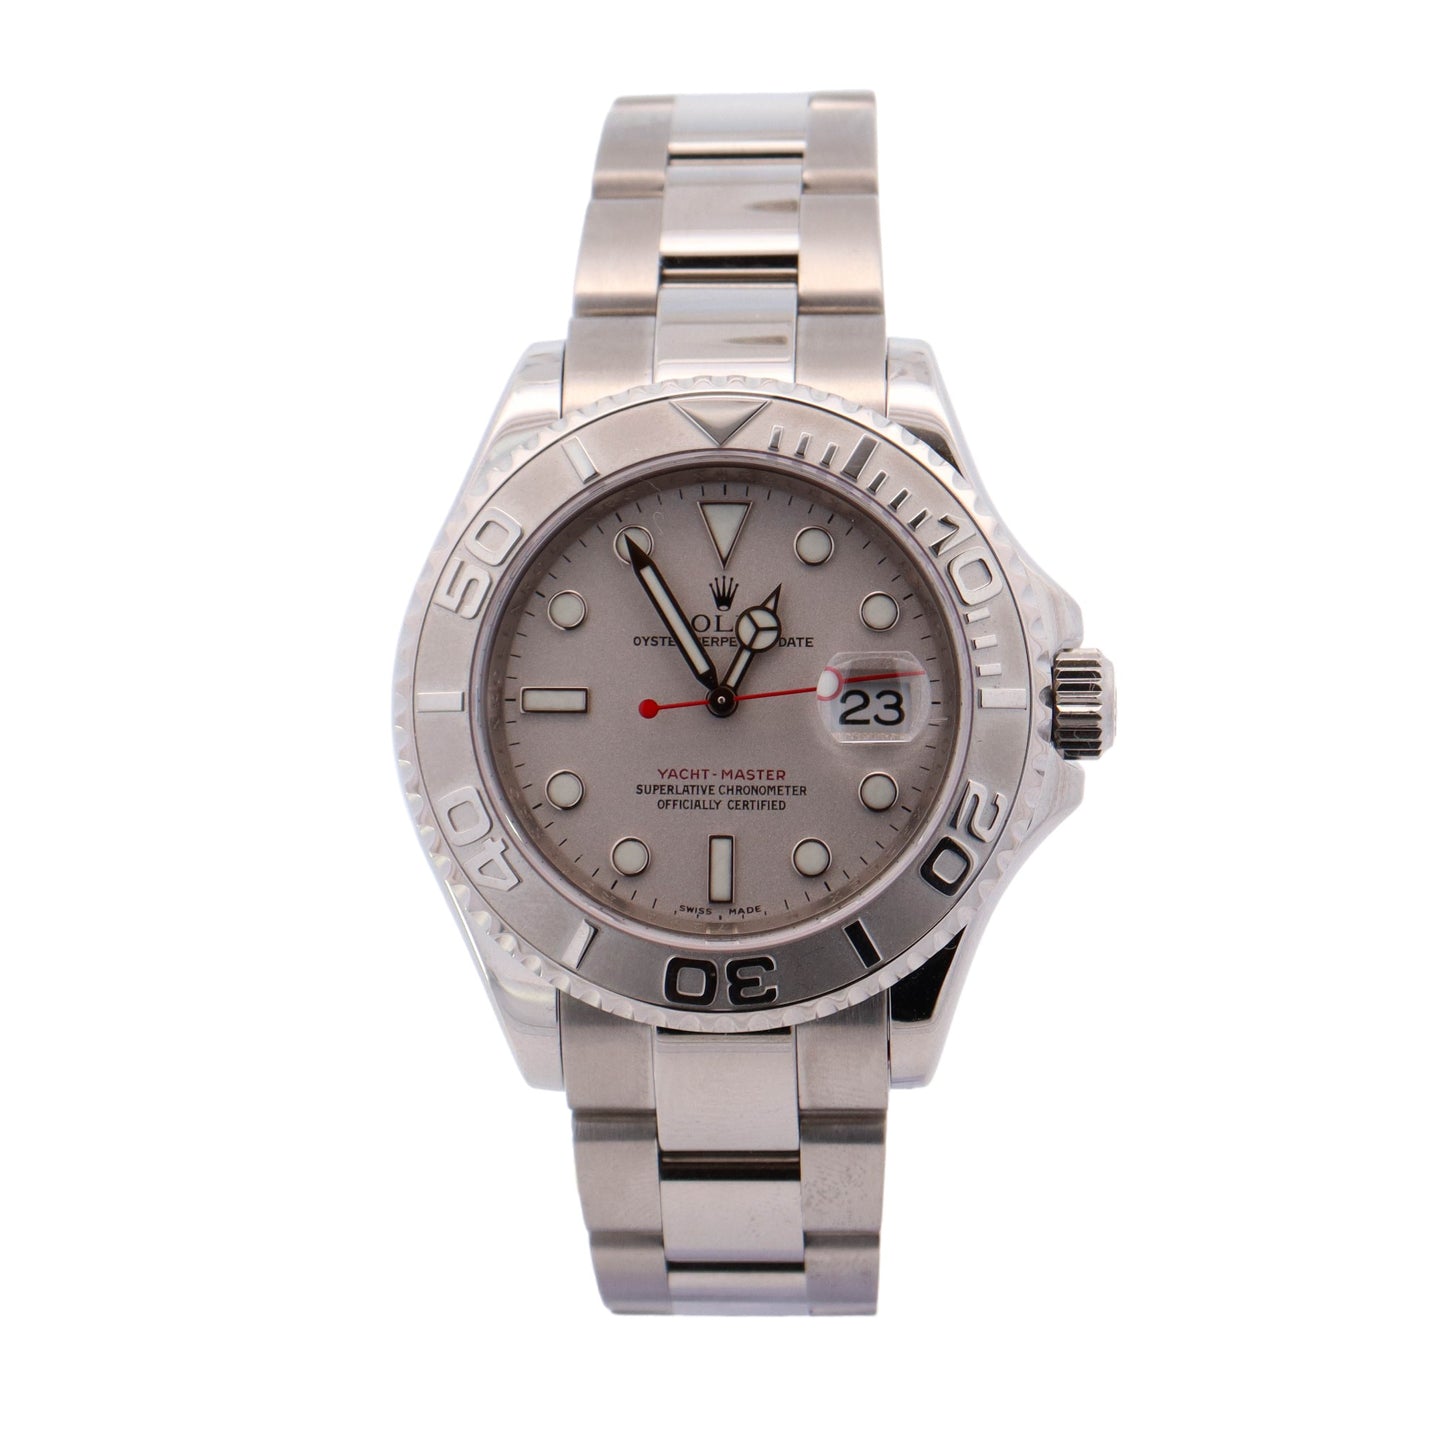 Rolex Yachtmaster Platinum and Stainless Steel 40mm Platinum Dial Watch Reference #: 16622 - Happy Jewelers Fine Jewelry Lifetime Warranty